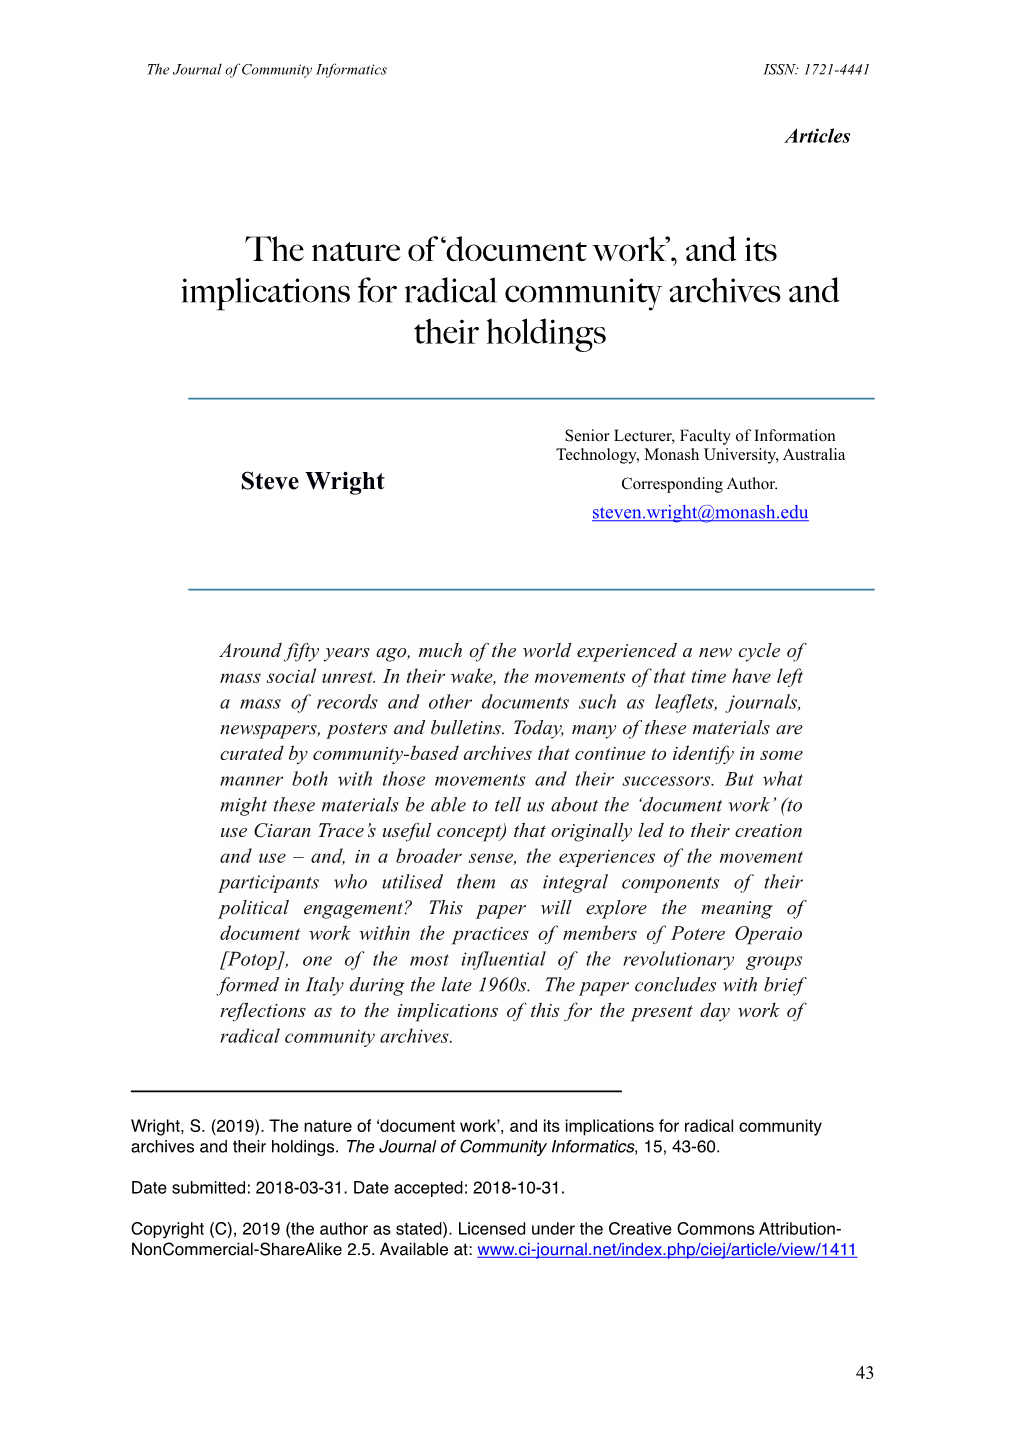 'Document Work', and Its Implications for Radical Community Archives And